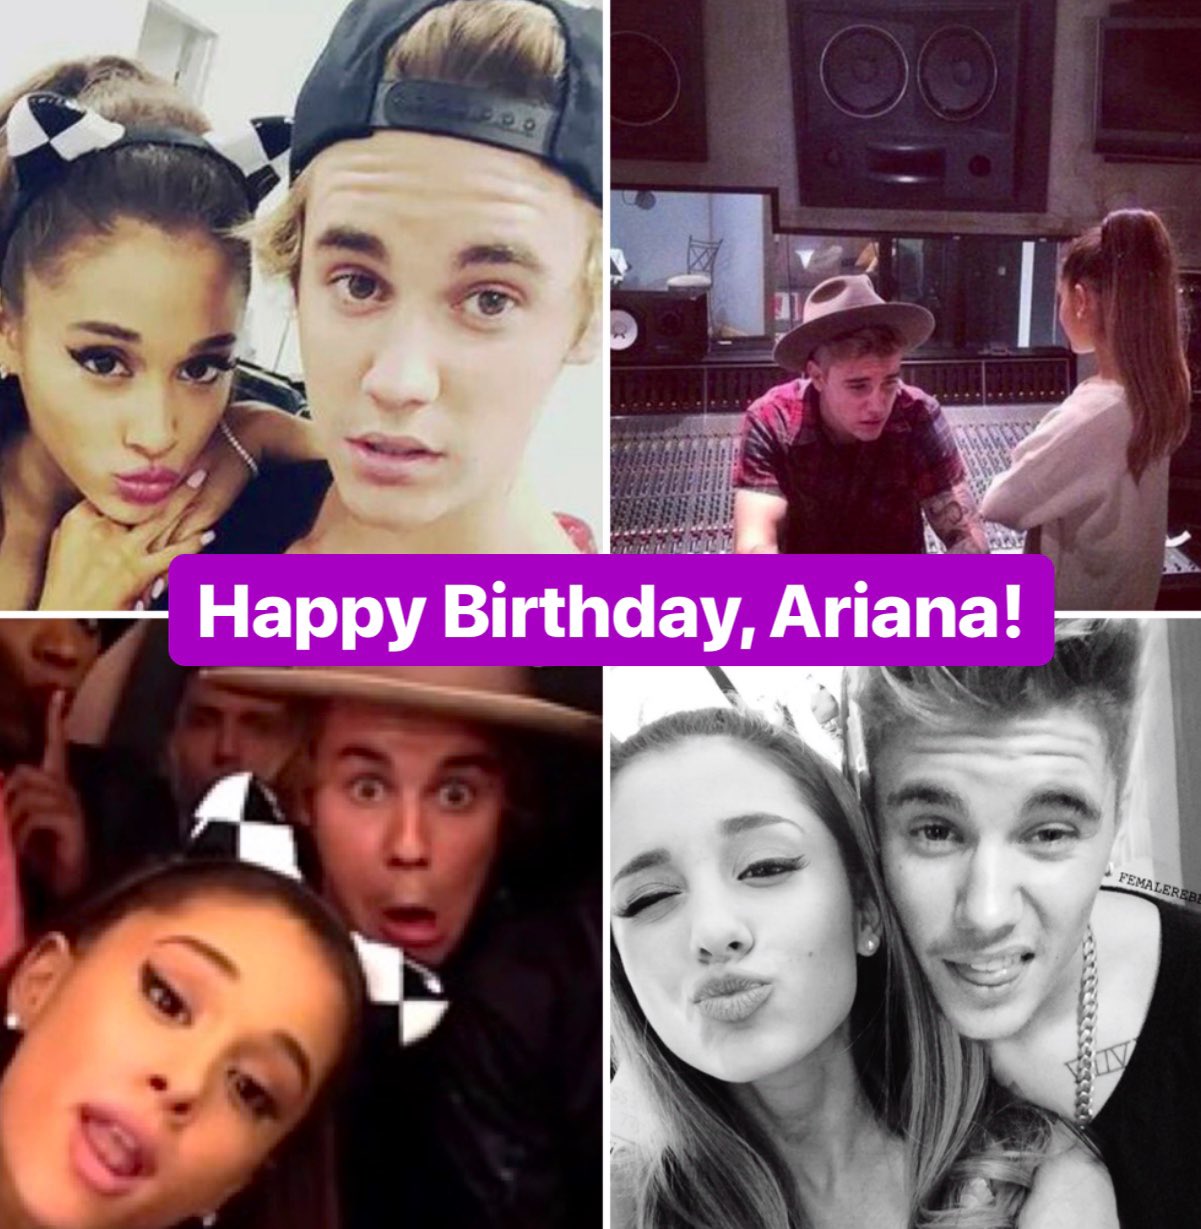 Please join us in wishing Ariana Grande a very Happy Birthday, today. We hope you have an awesome day! 